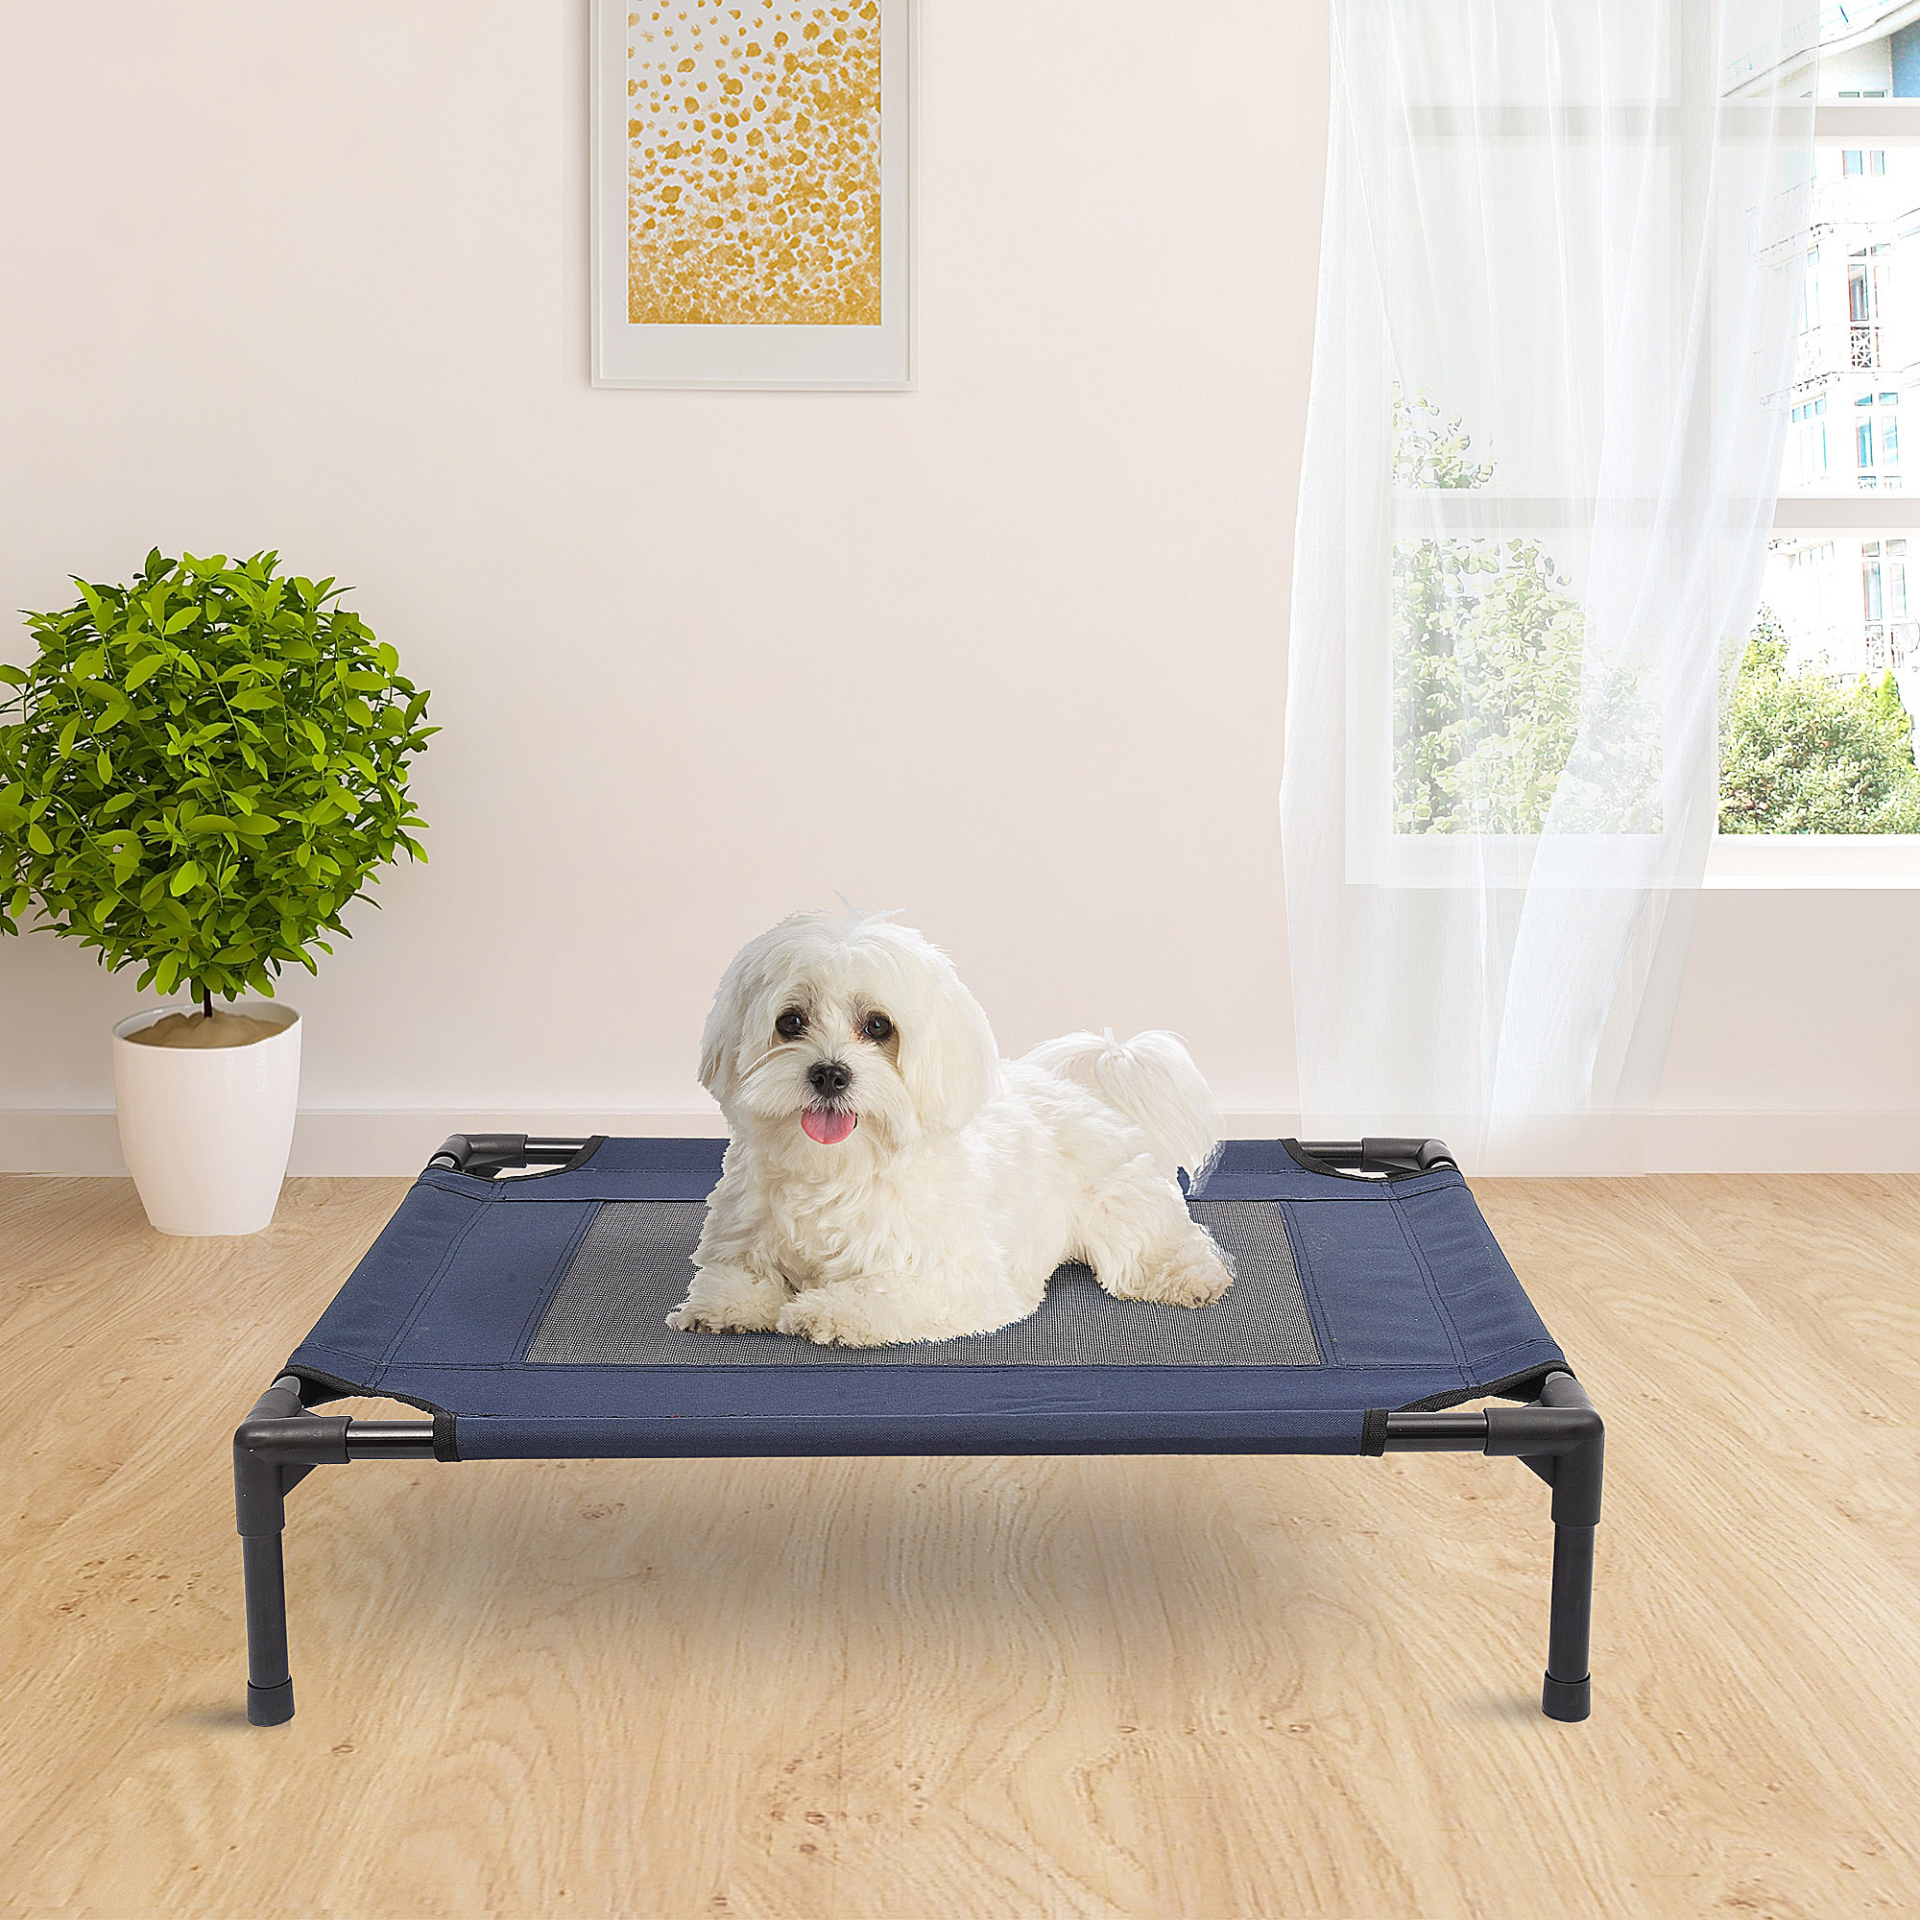 PawHut Raised Dog Bed Cat Elevated Lifted Puppy Pet Elevated Cot - Blue (Medium) | Portable Camping Basket Camping Dog Bed Cosy Camping Co.   